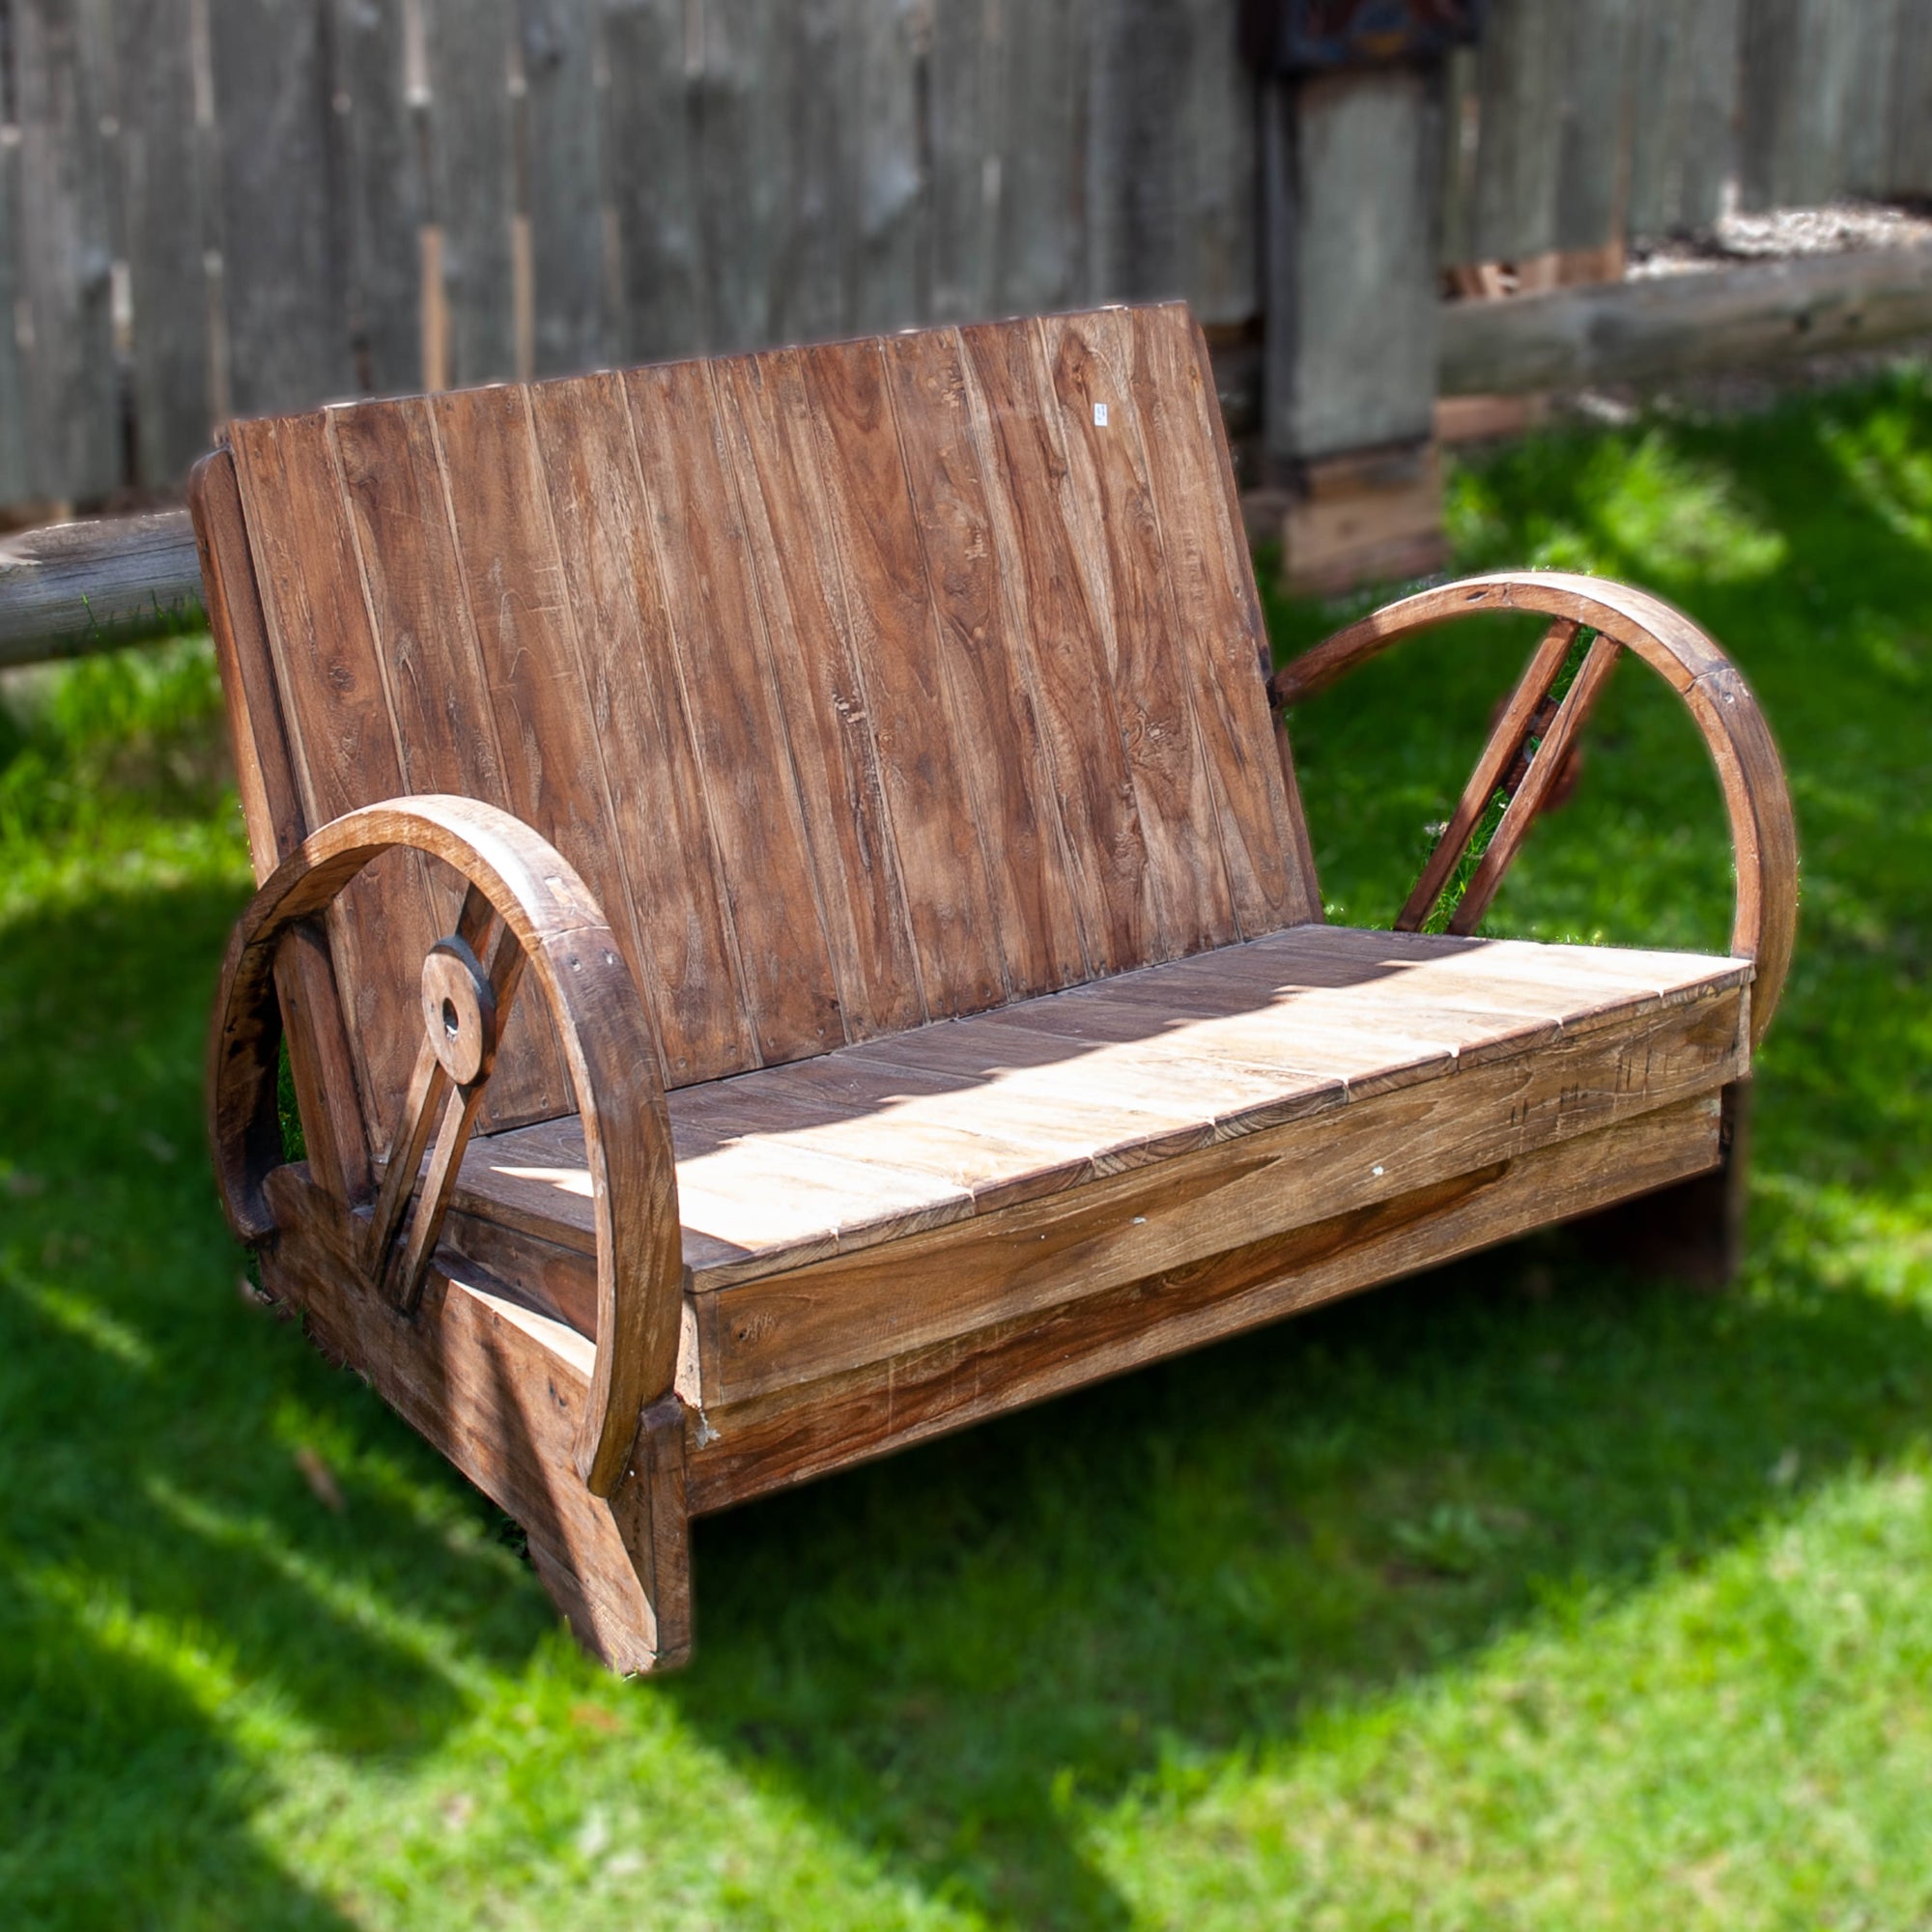 Simple wooden bench in natural wood with a laid back seat and low to the ground